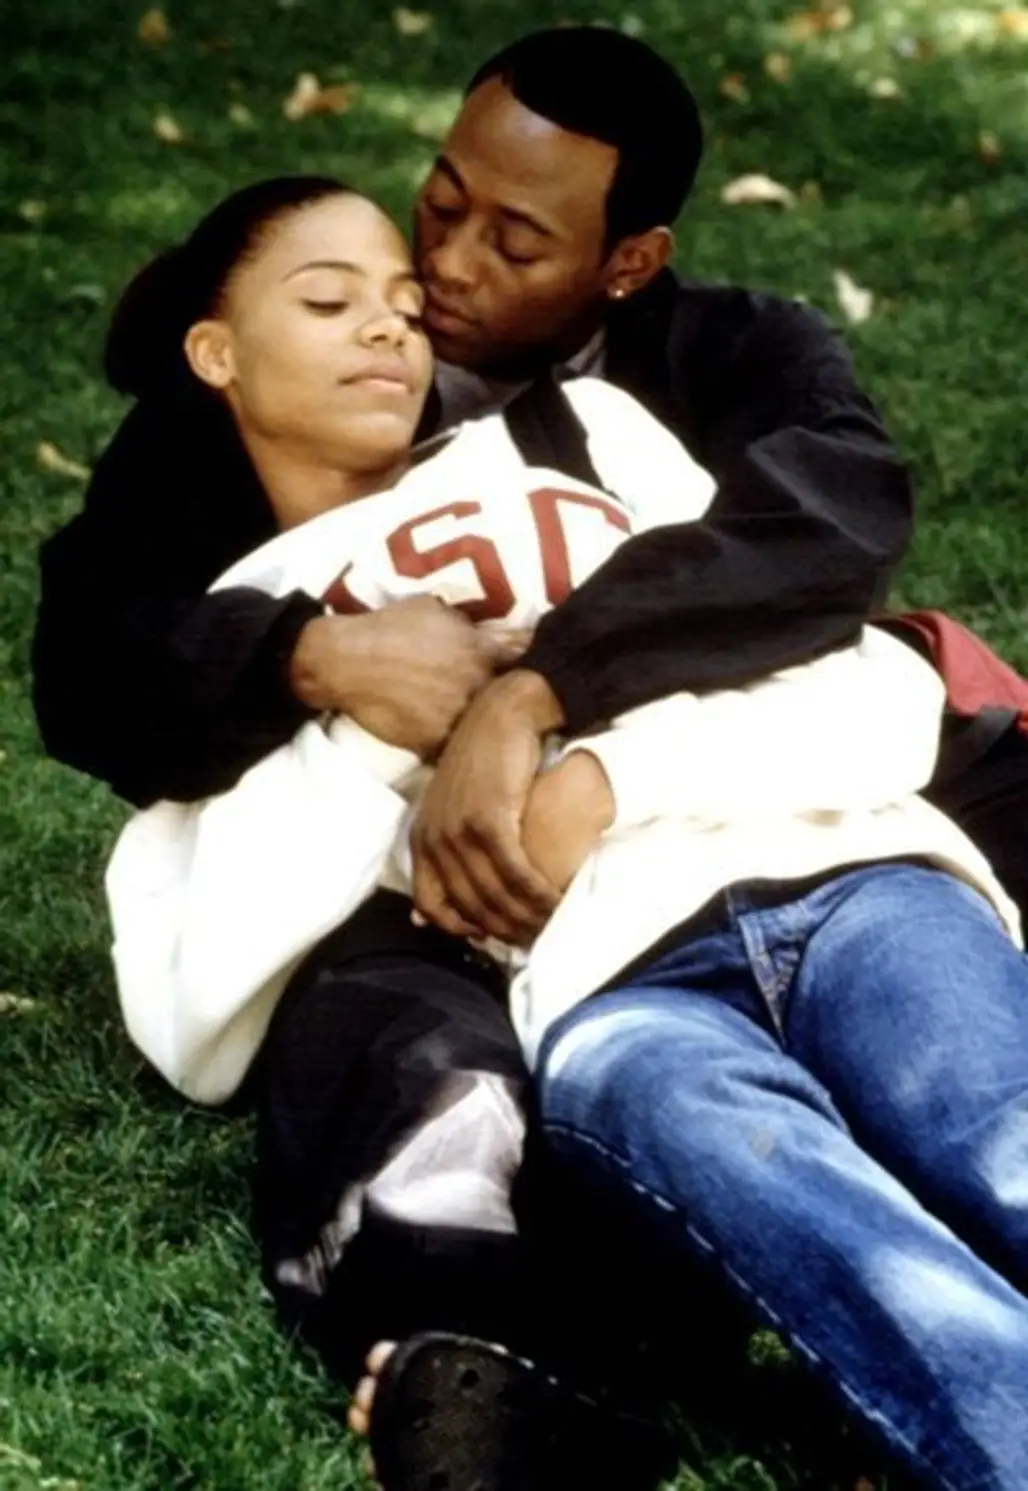 Quincy and Monica, "Love and Basketball"